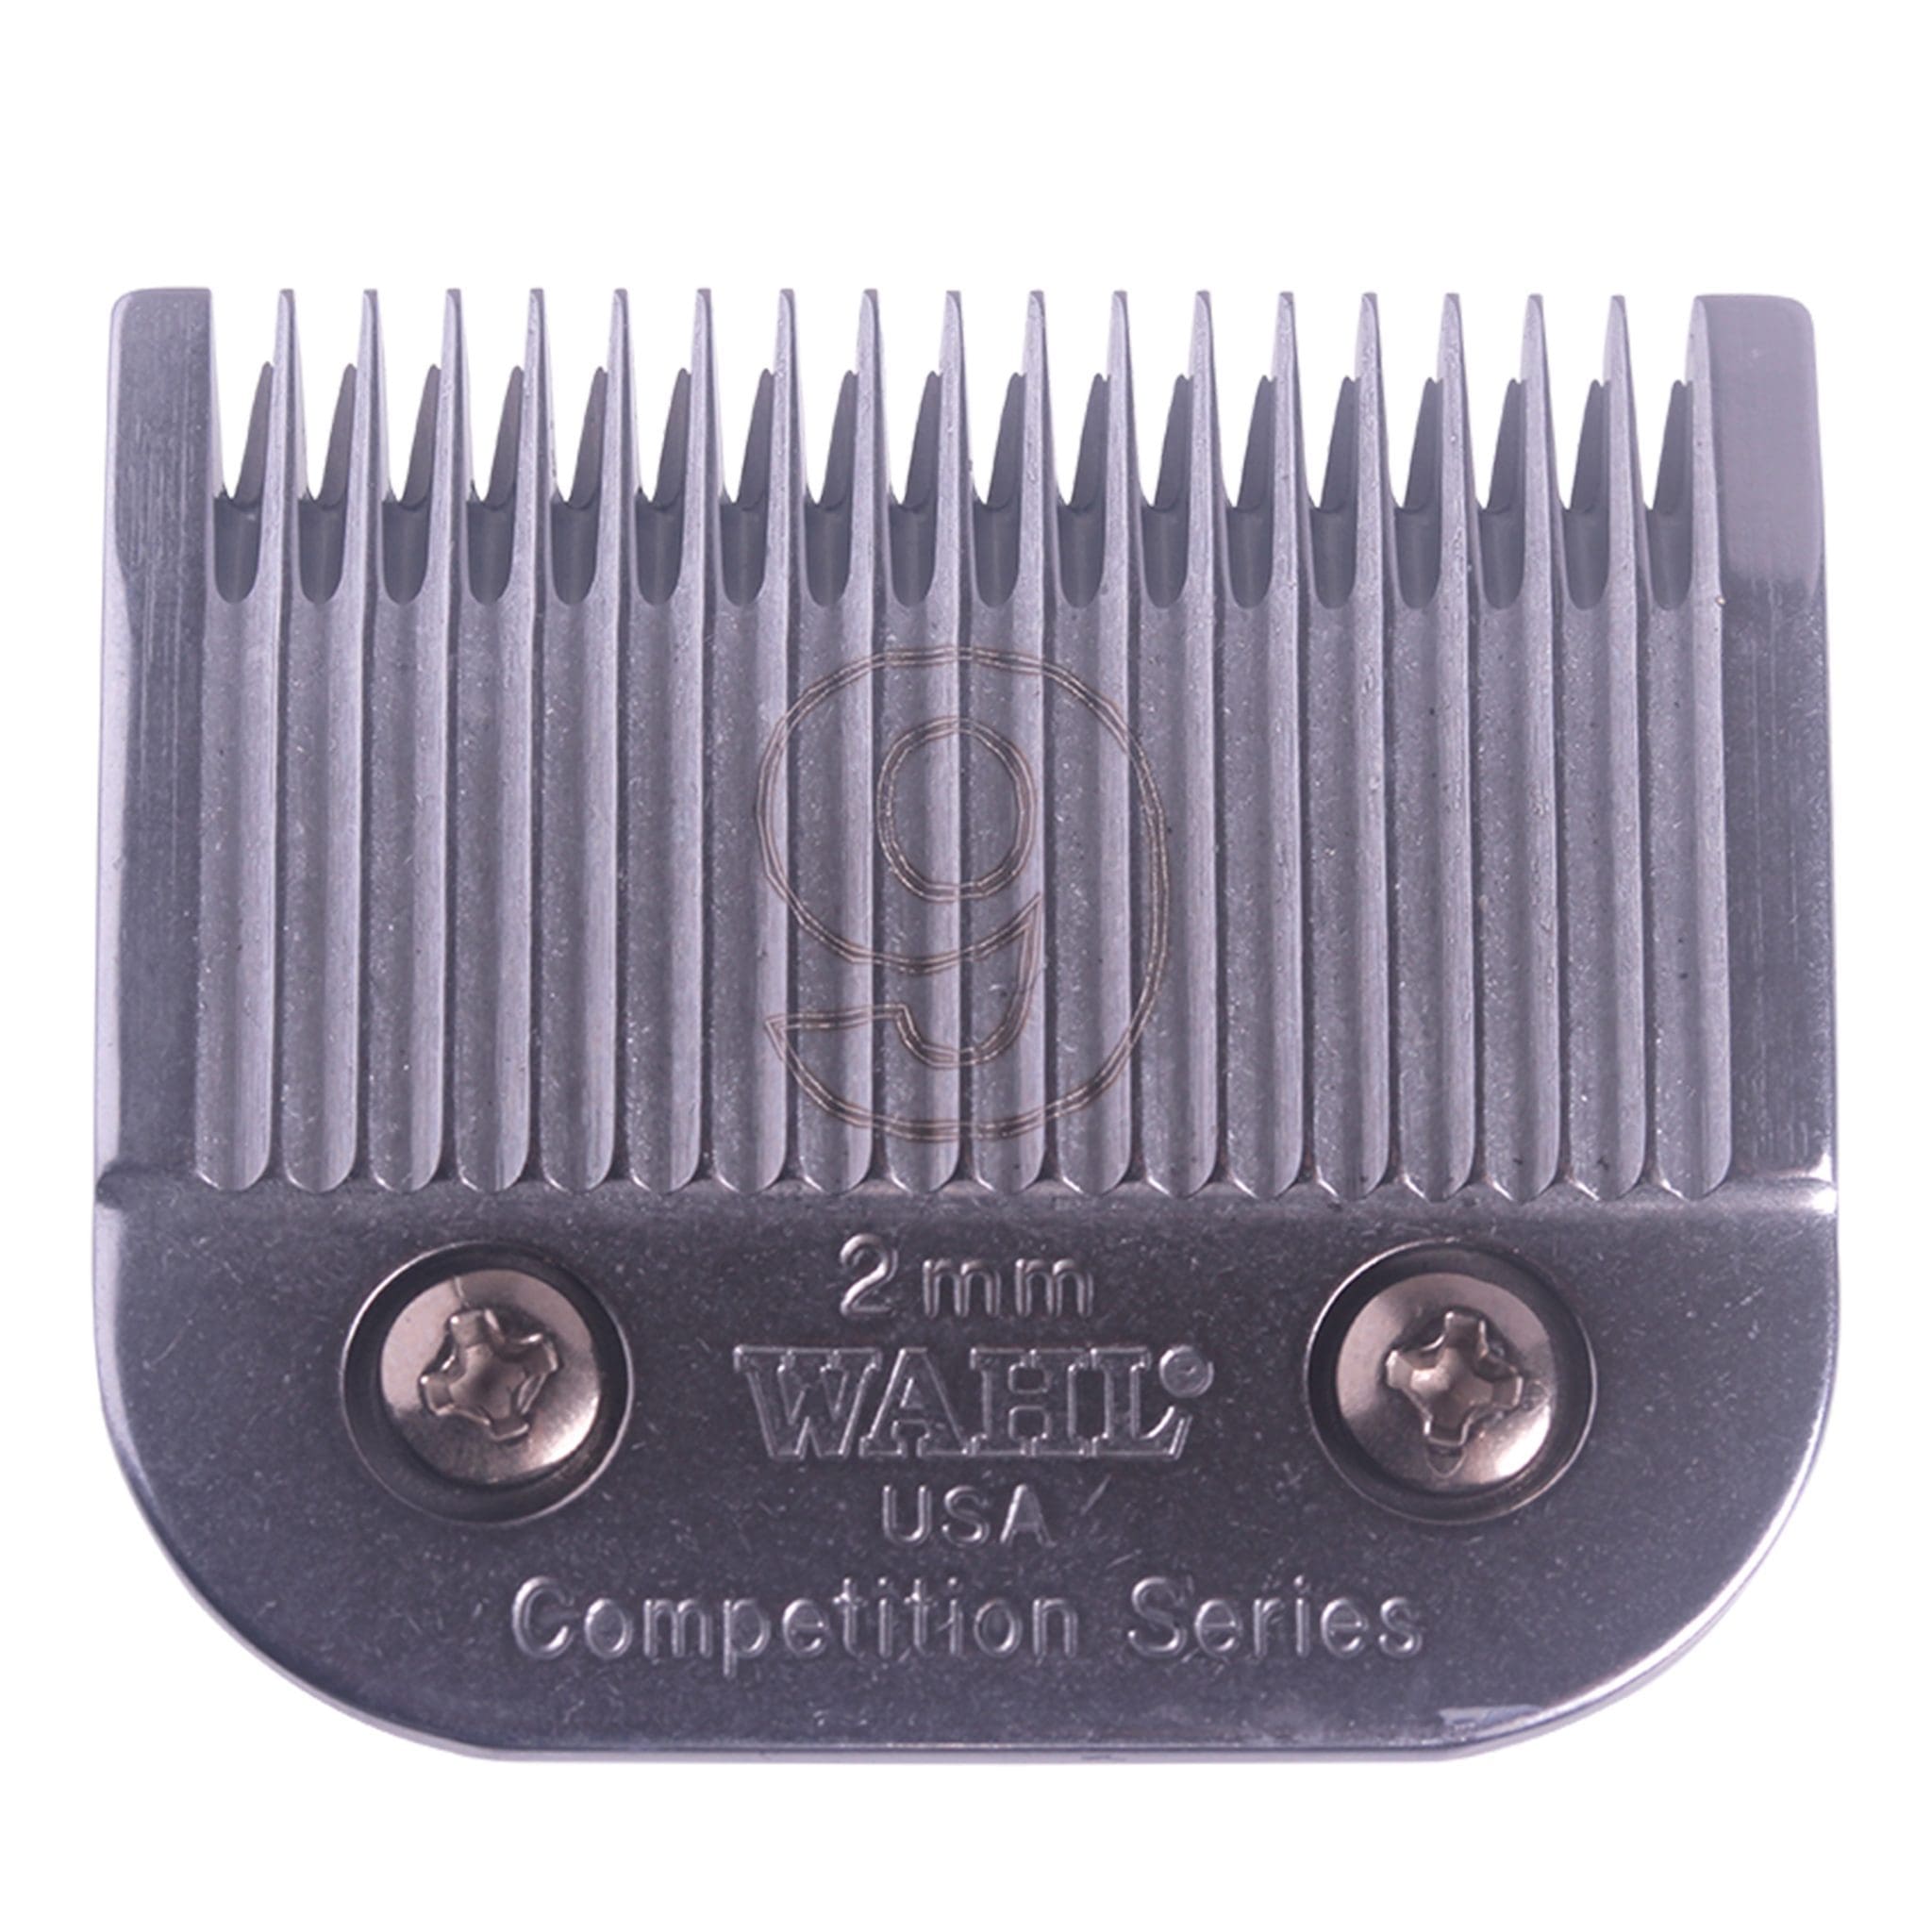 Wahl Competition Series blades